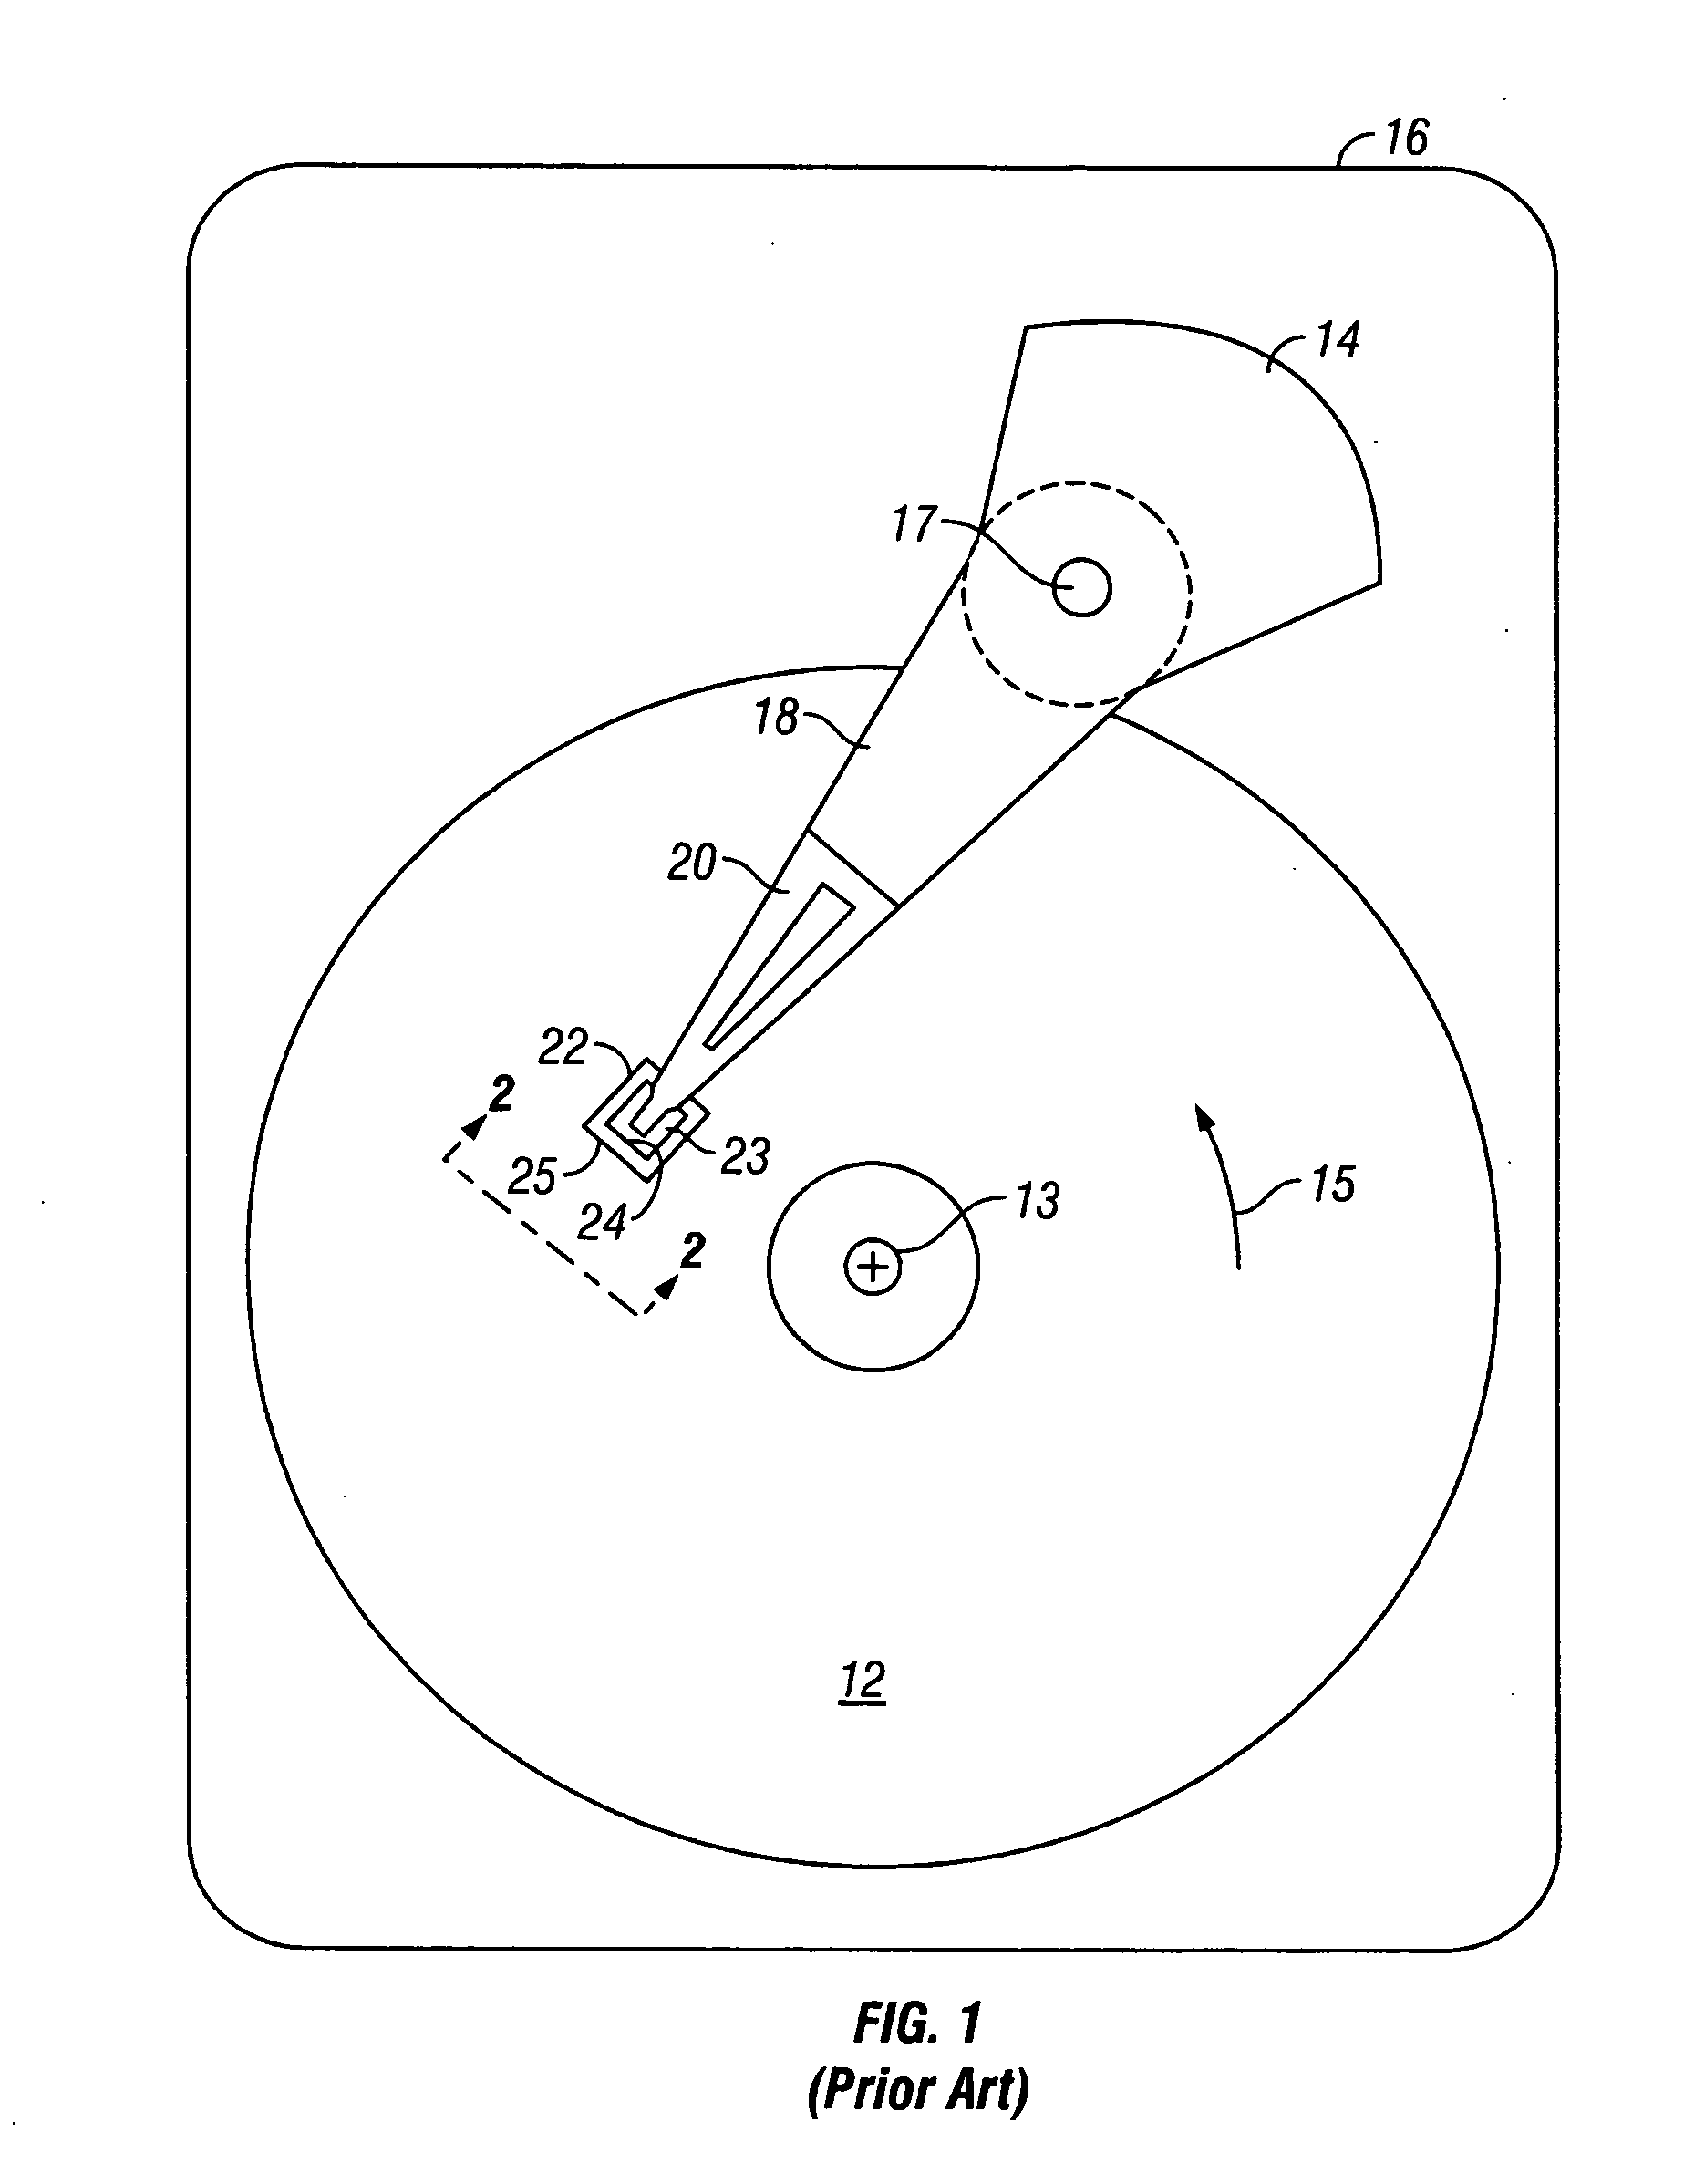 Method for reactive sputter deposition of a magnesium oxide (MgO) tunnel barrier in a magnetic tunnel junction